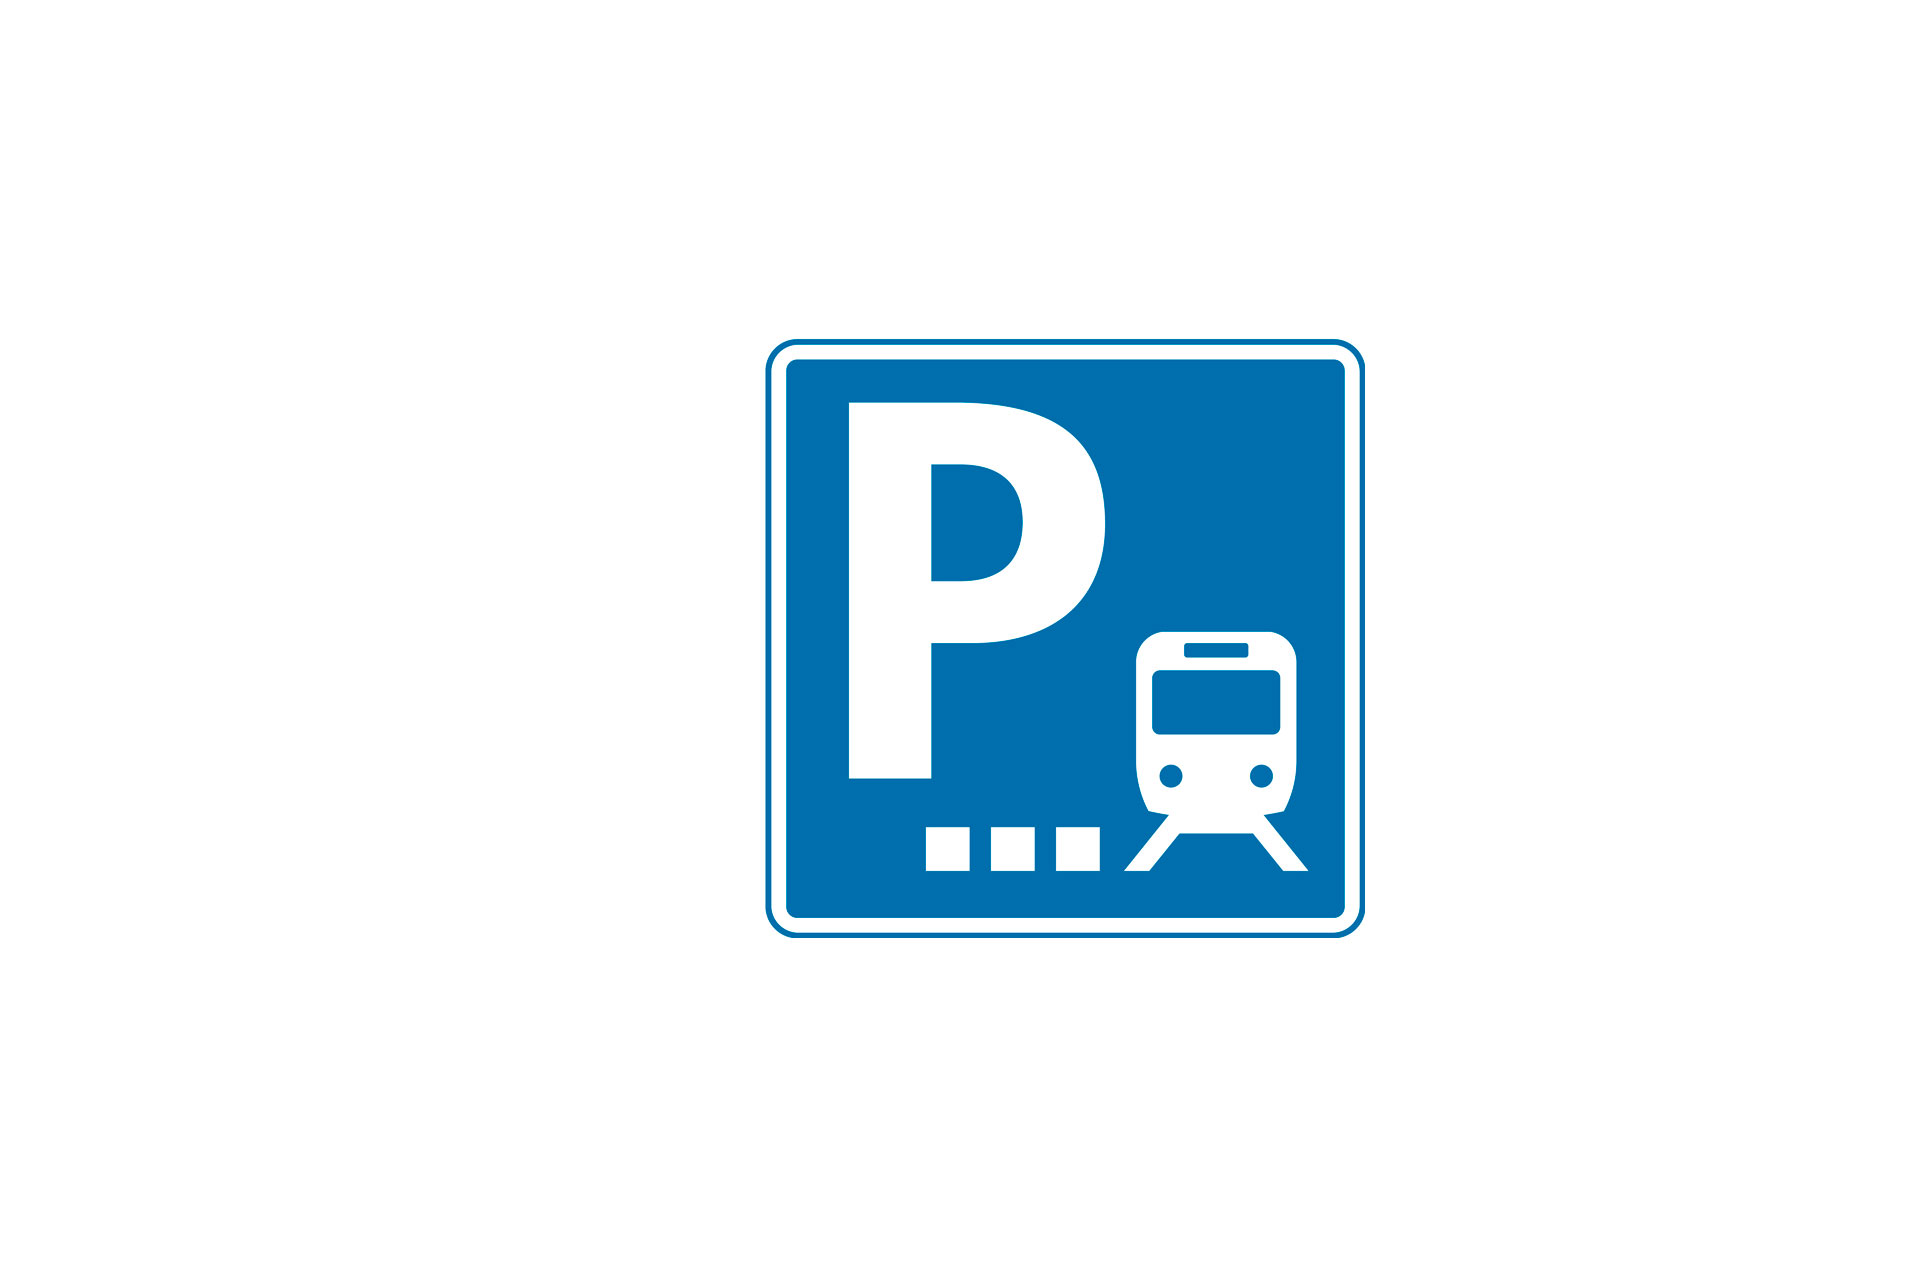 park and ride sign, 2005<br>©MLIT Japan